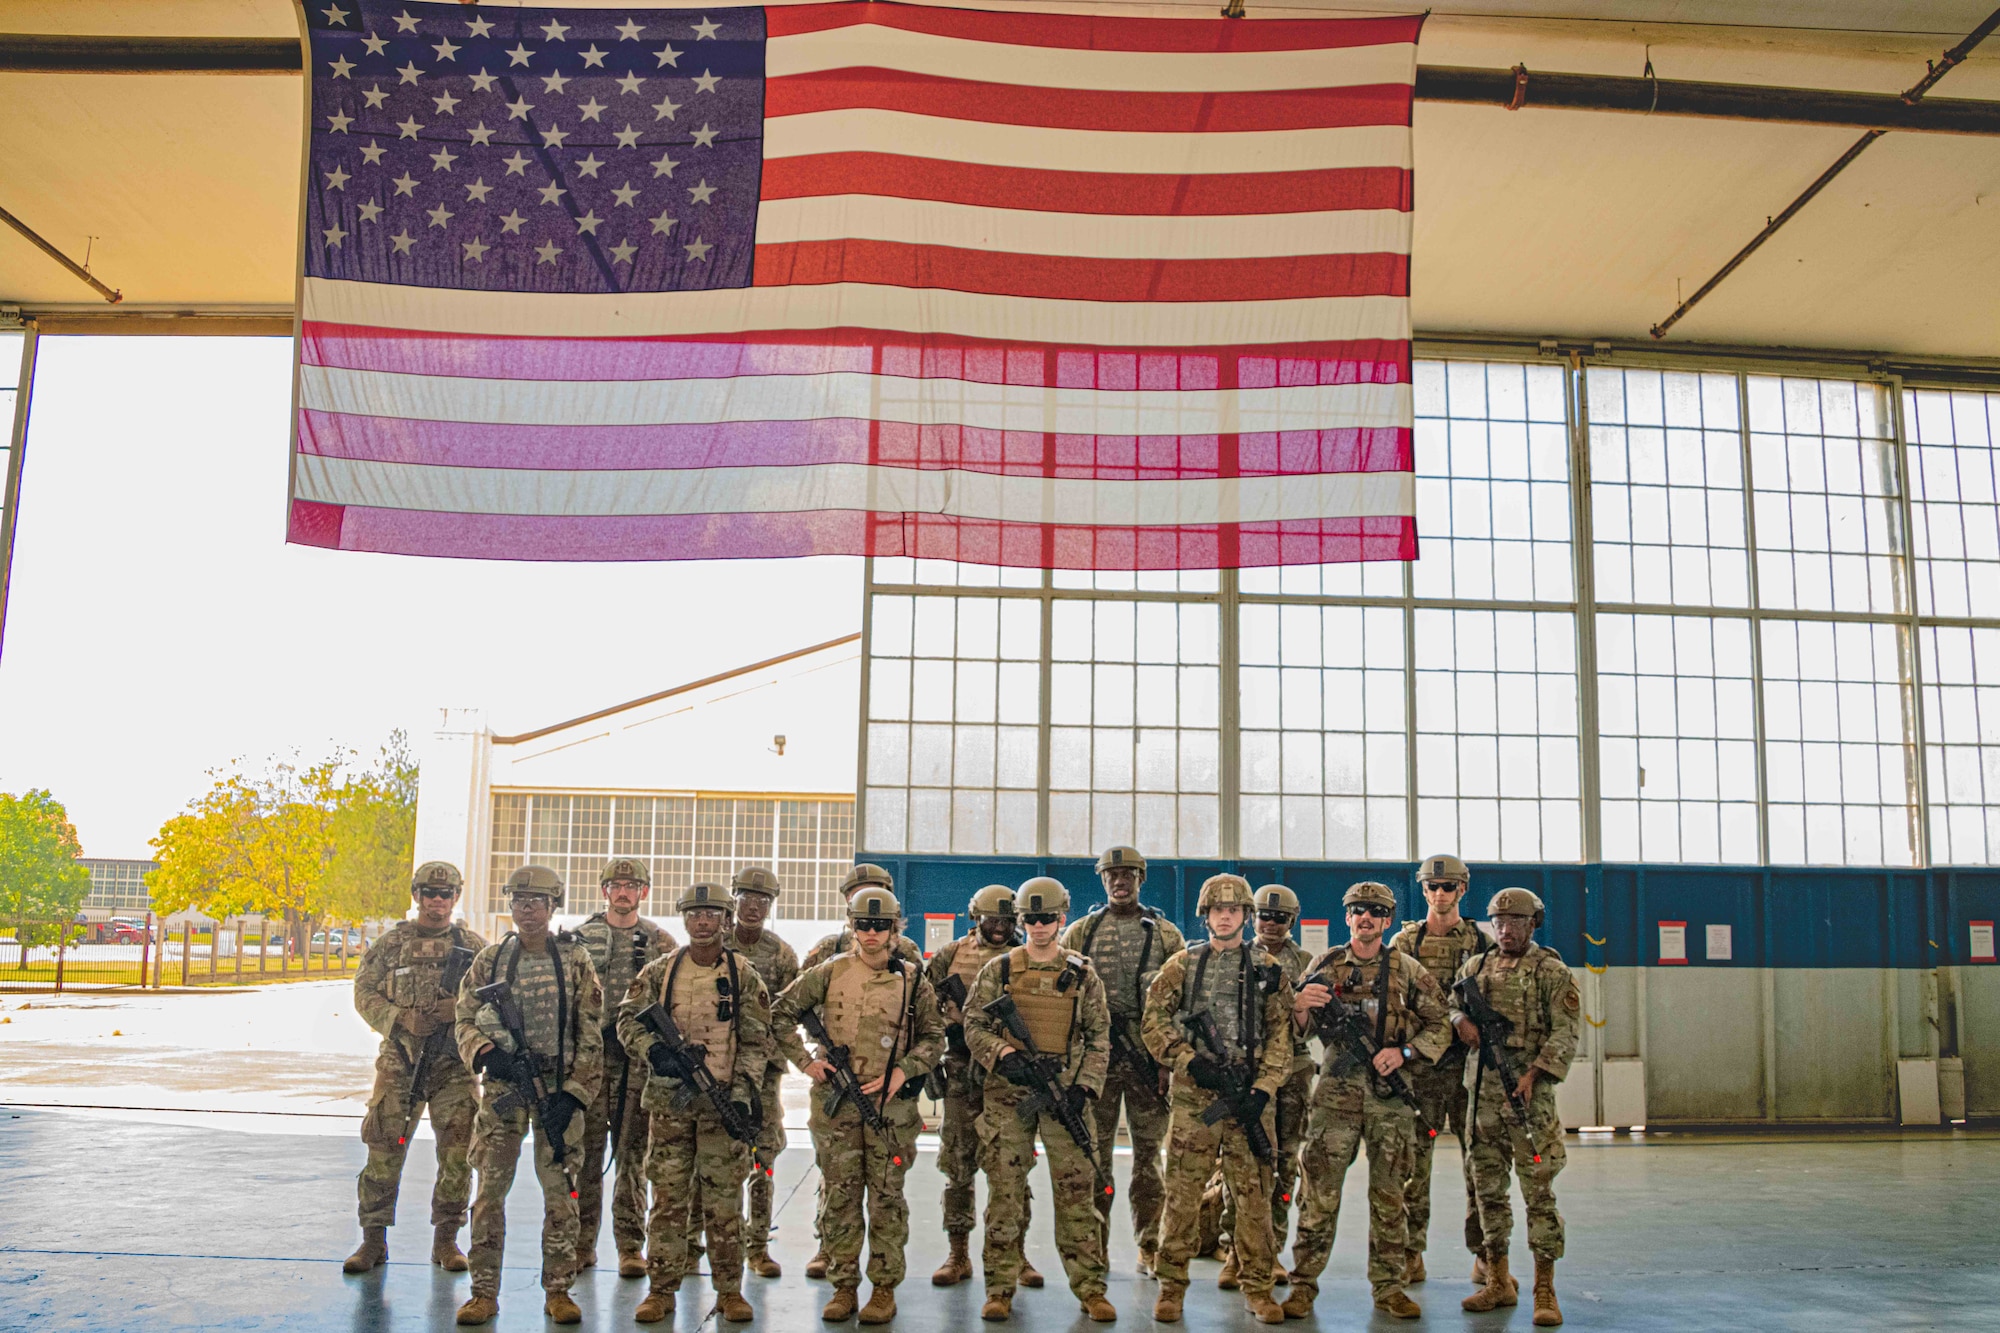 Military members standing in a hanger under the American flag